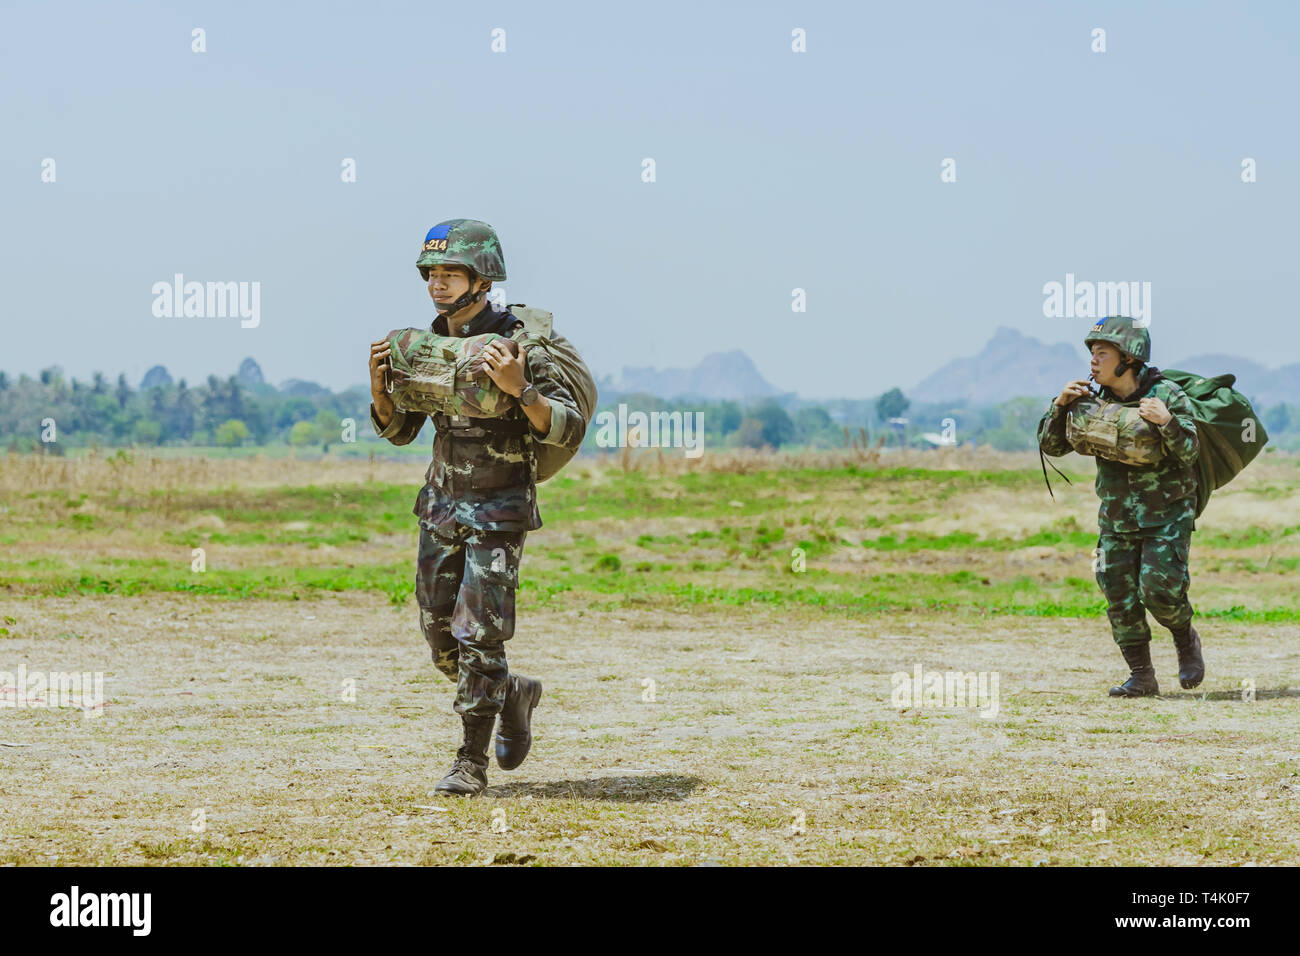 https://c8.alamy.com/comp/T4K0F7/lopburi-thailand-march-24-2019-unidentified-cadets-walked-back-to-the-stronghold-after-practicing-skydiving-at-ban-tha-duea-drop-zone-on-march-24-T4K0F7.jpg